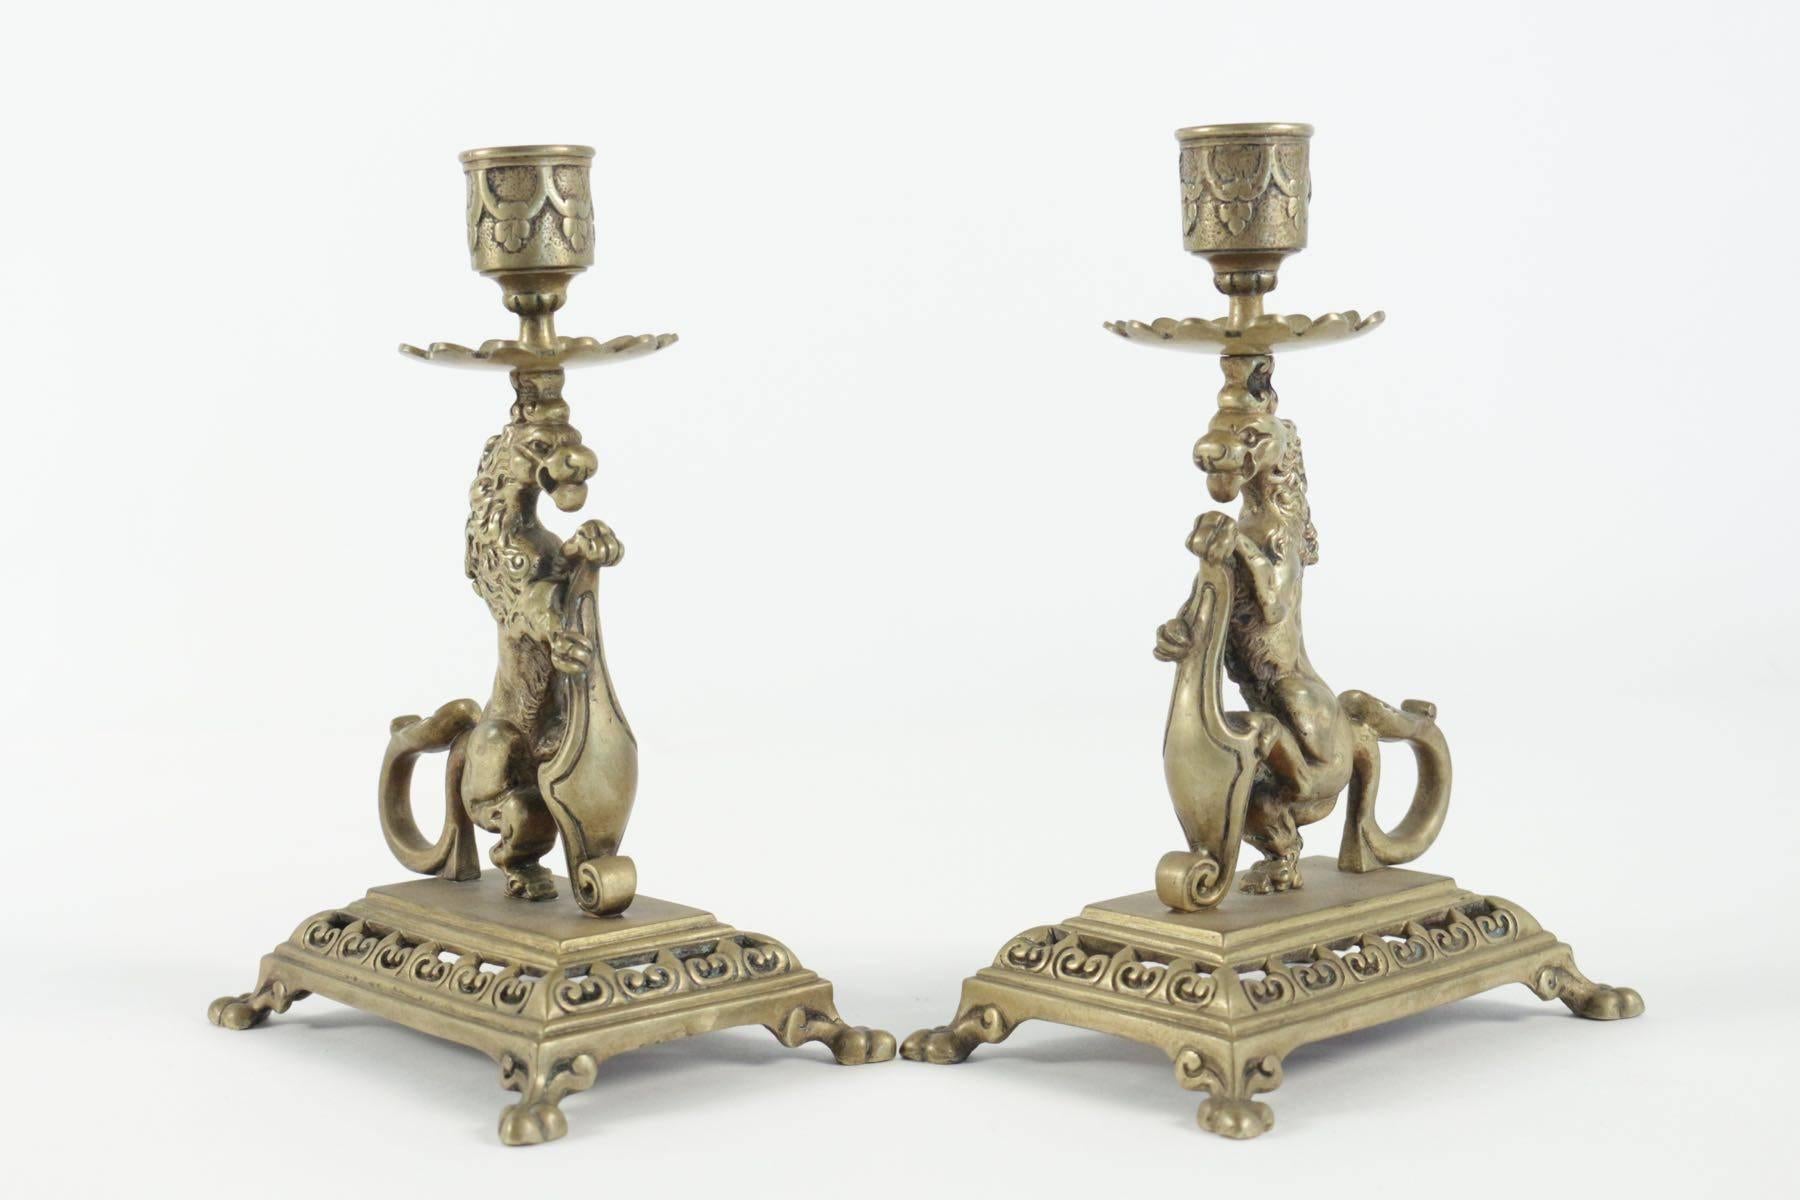 Pair of candlesticks from the 19th century in bronze.